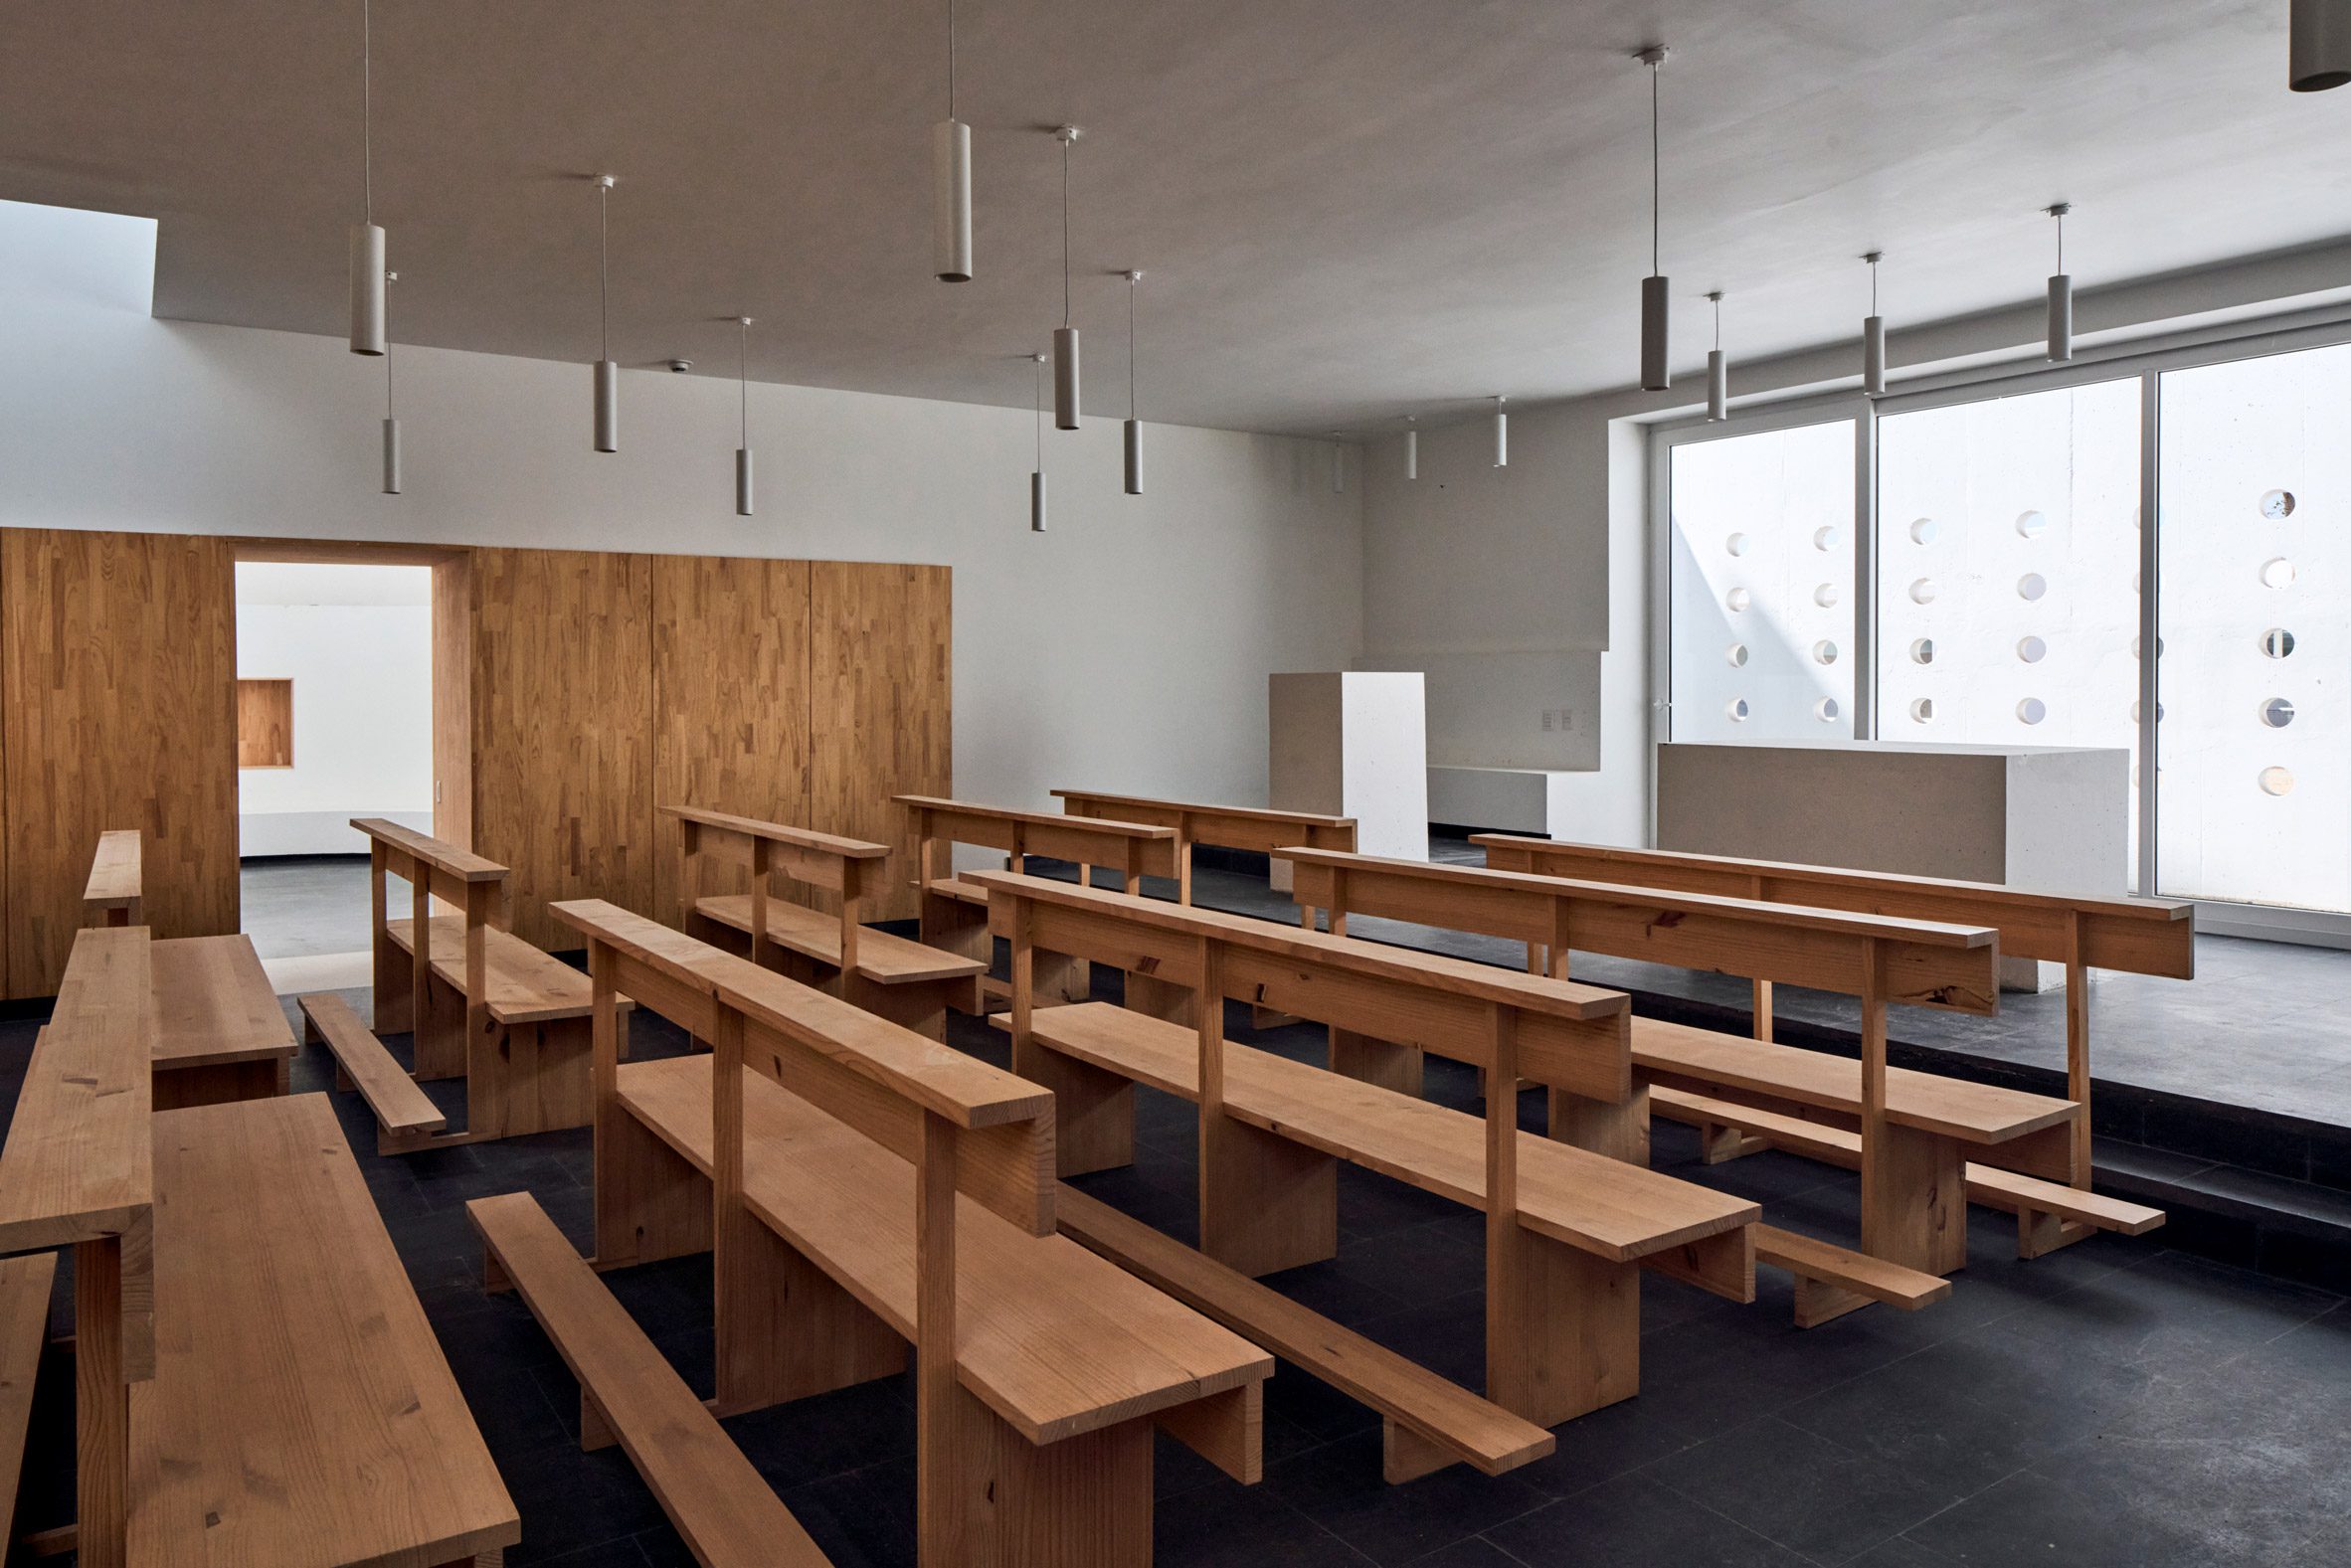 The classrooms feature neutral wooden cabinetry